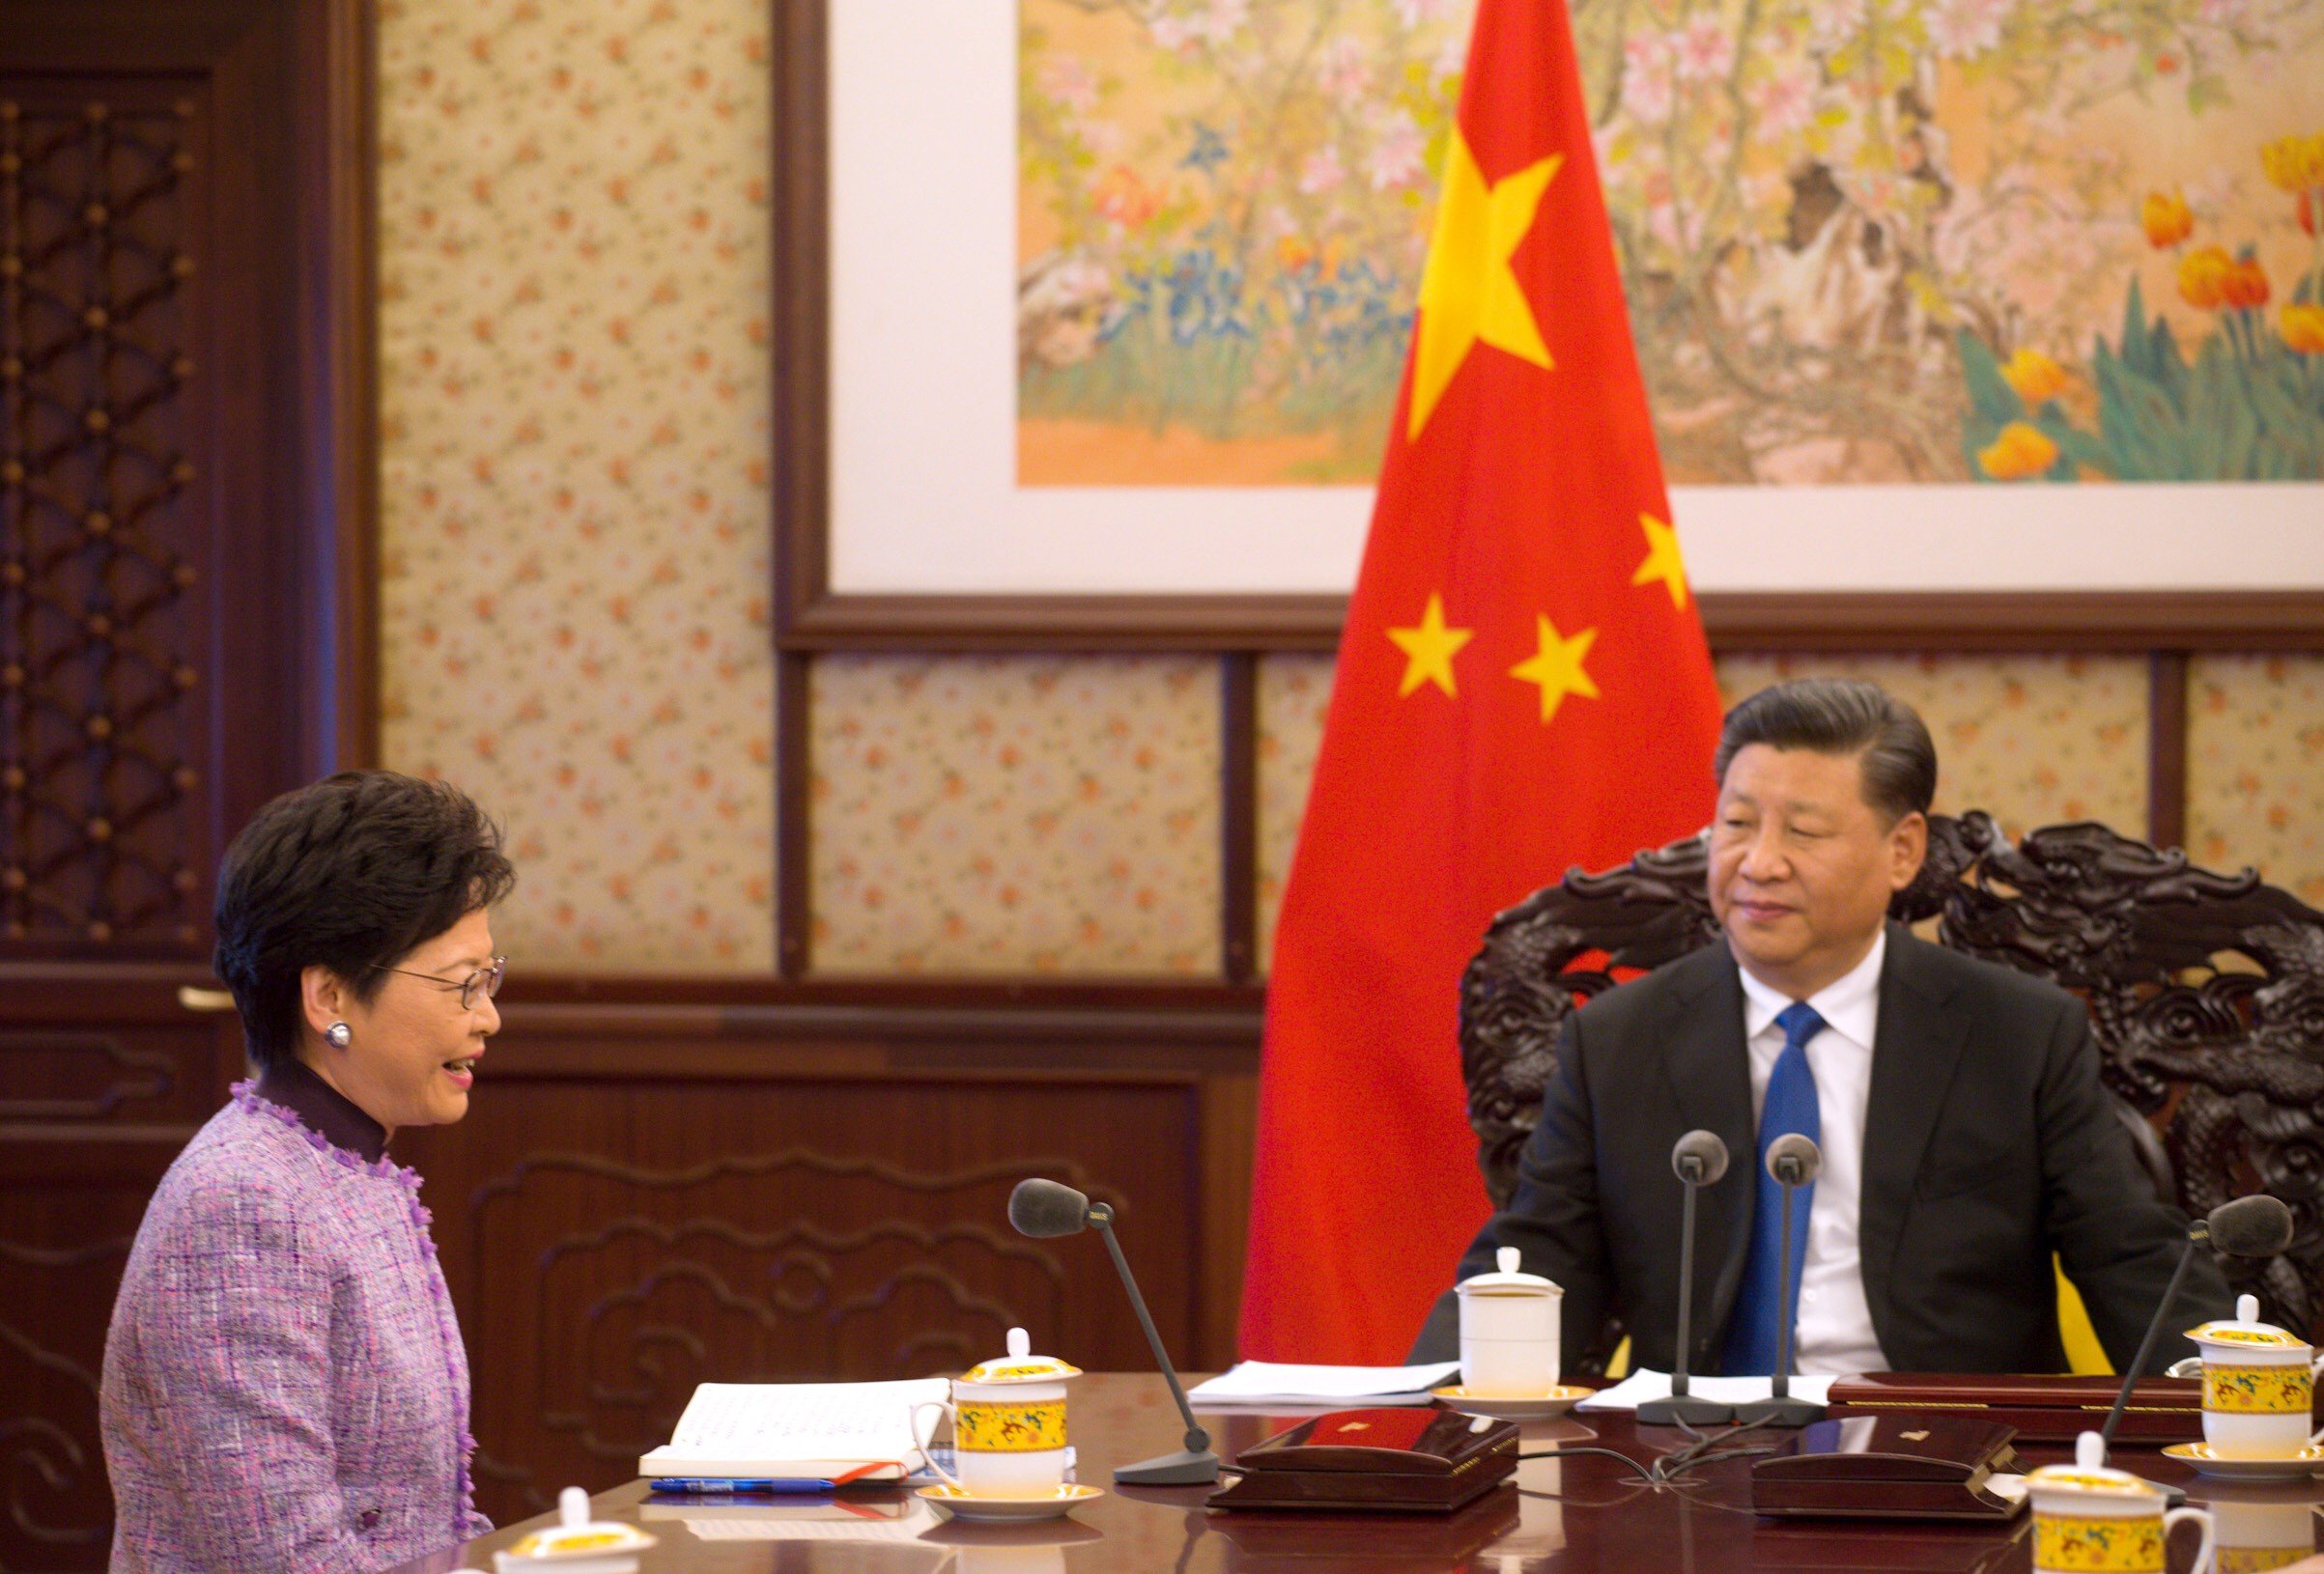 Chief Executive Carrie Lam briefs President Xi Jinping on Hong Kong affairs in Beijing in December 2018. Beijing’s surprise at the district council election results indicates that Lam and other Hong Kong officials have not provided adequate intelligence. Photo: ISD